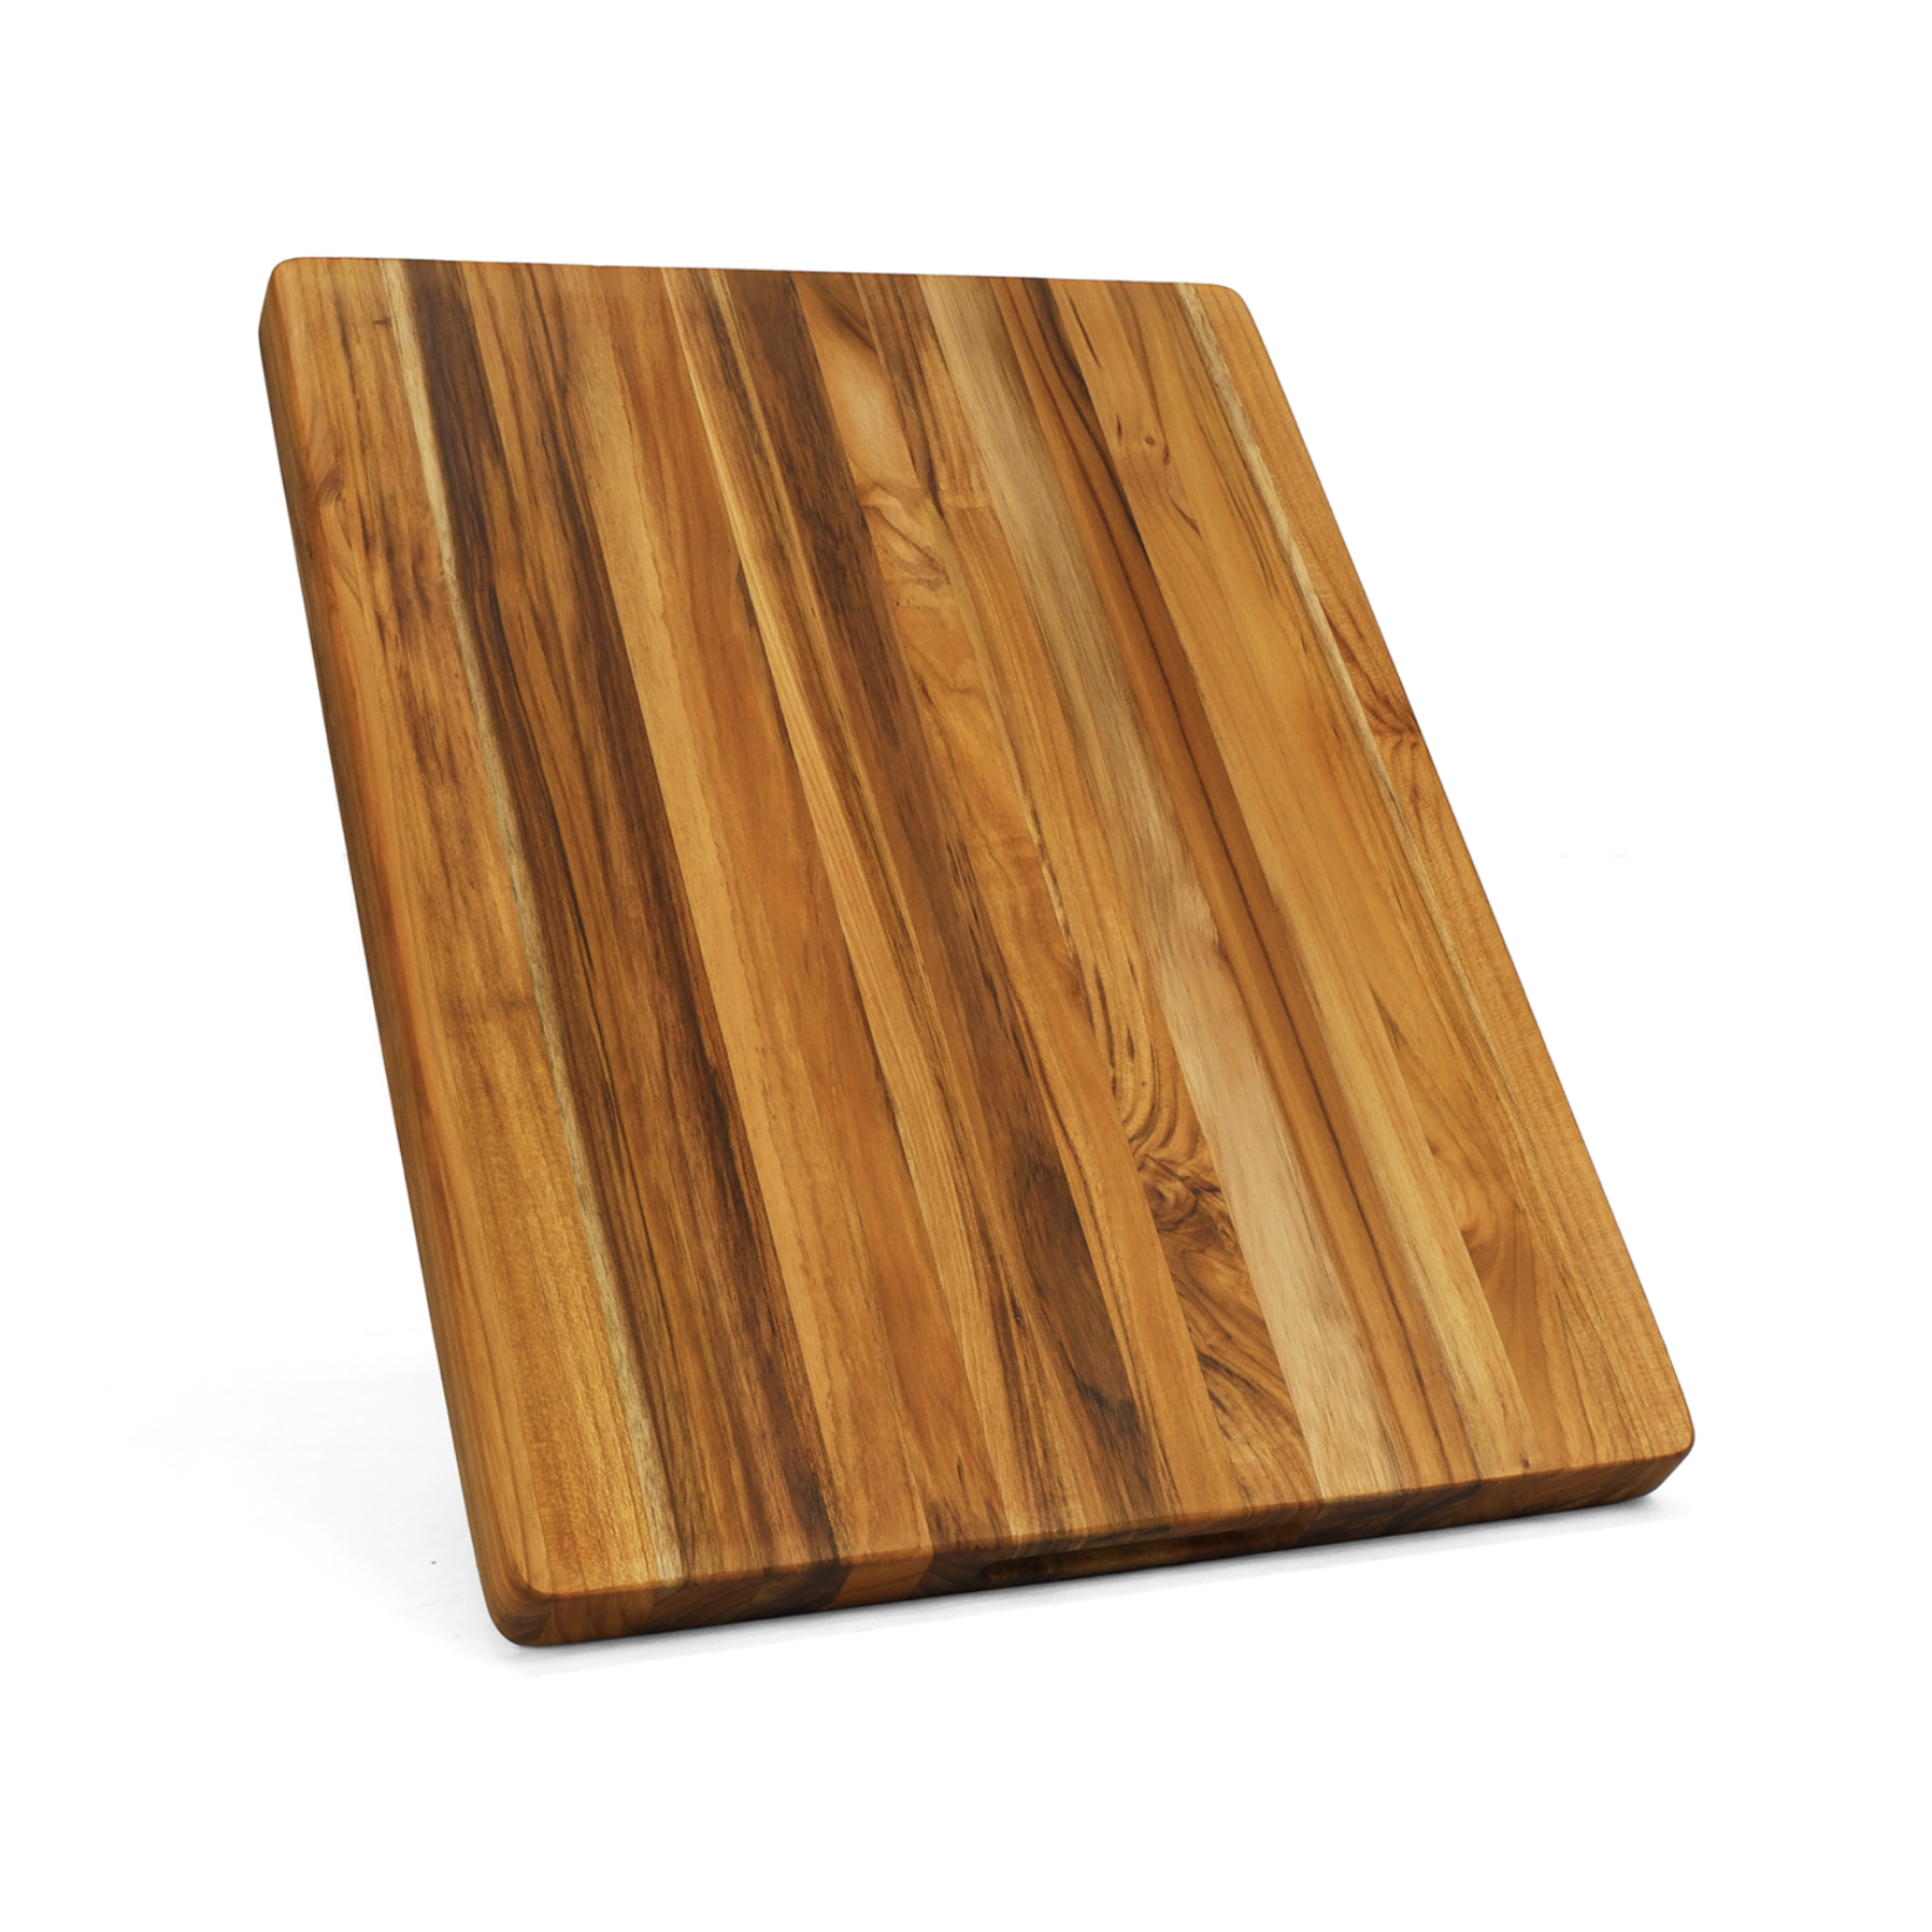 Teak Cutting Board Reversible Chopping Serving Board Multipurpose Food Safe Thick Board, Medium Size 20x15x1.25 inches